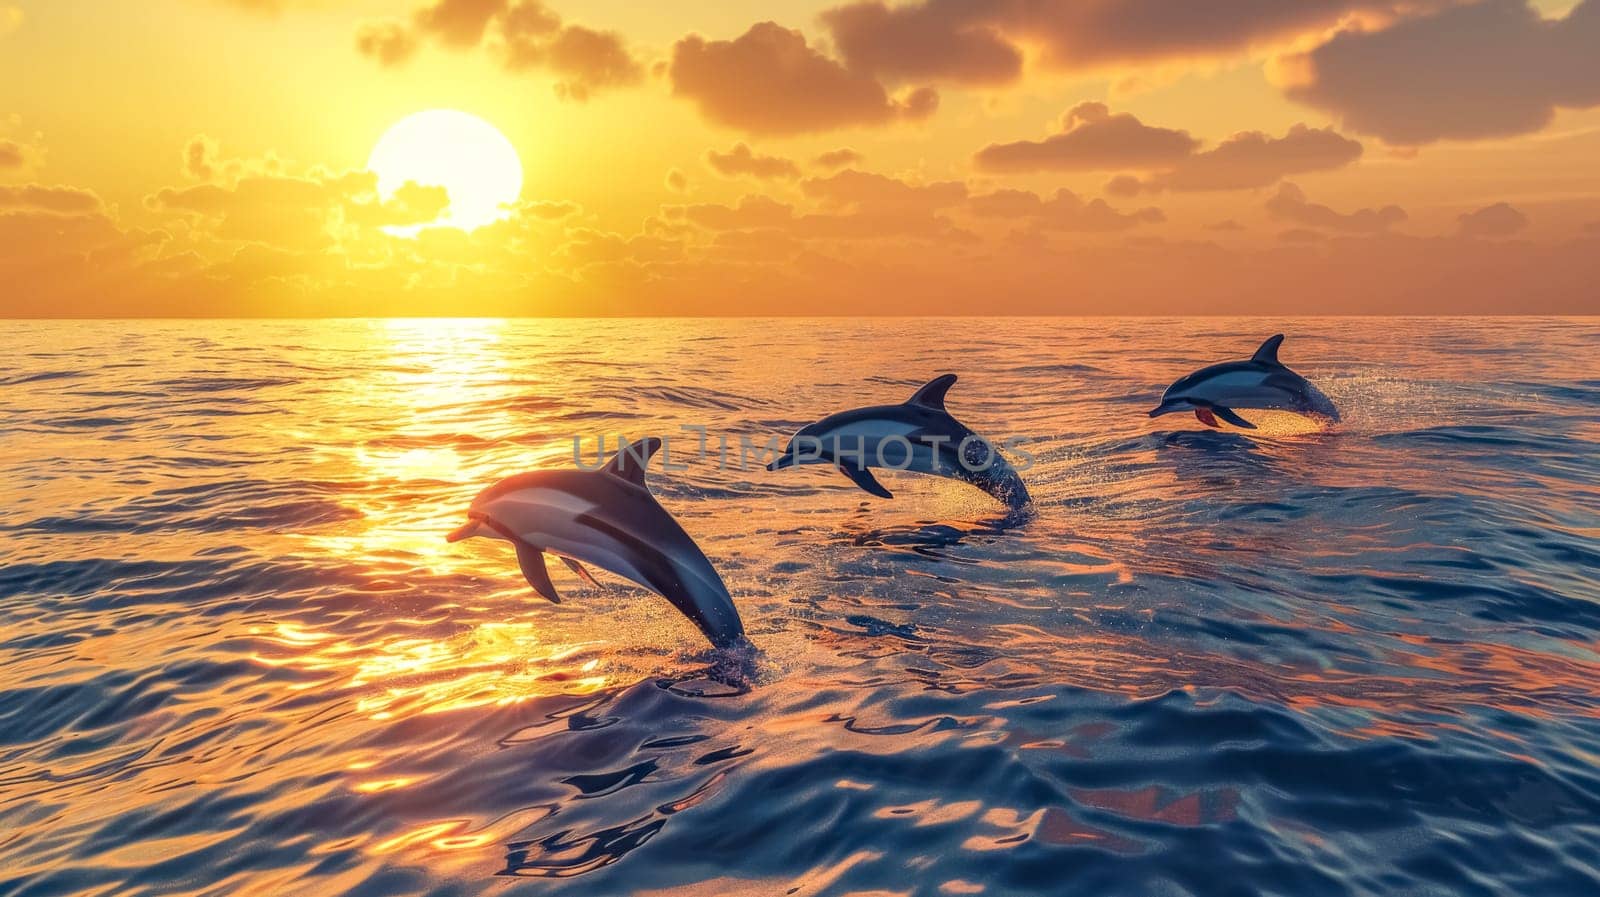 Three dolphins leaping gracefully over ocean waves during a vibrant sunset by Edophoto